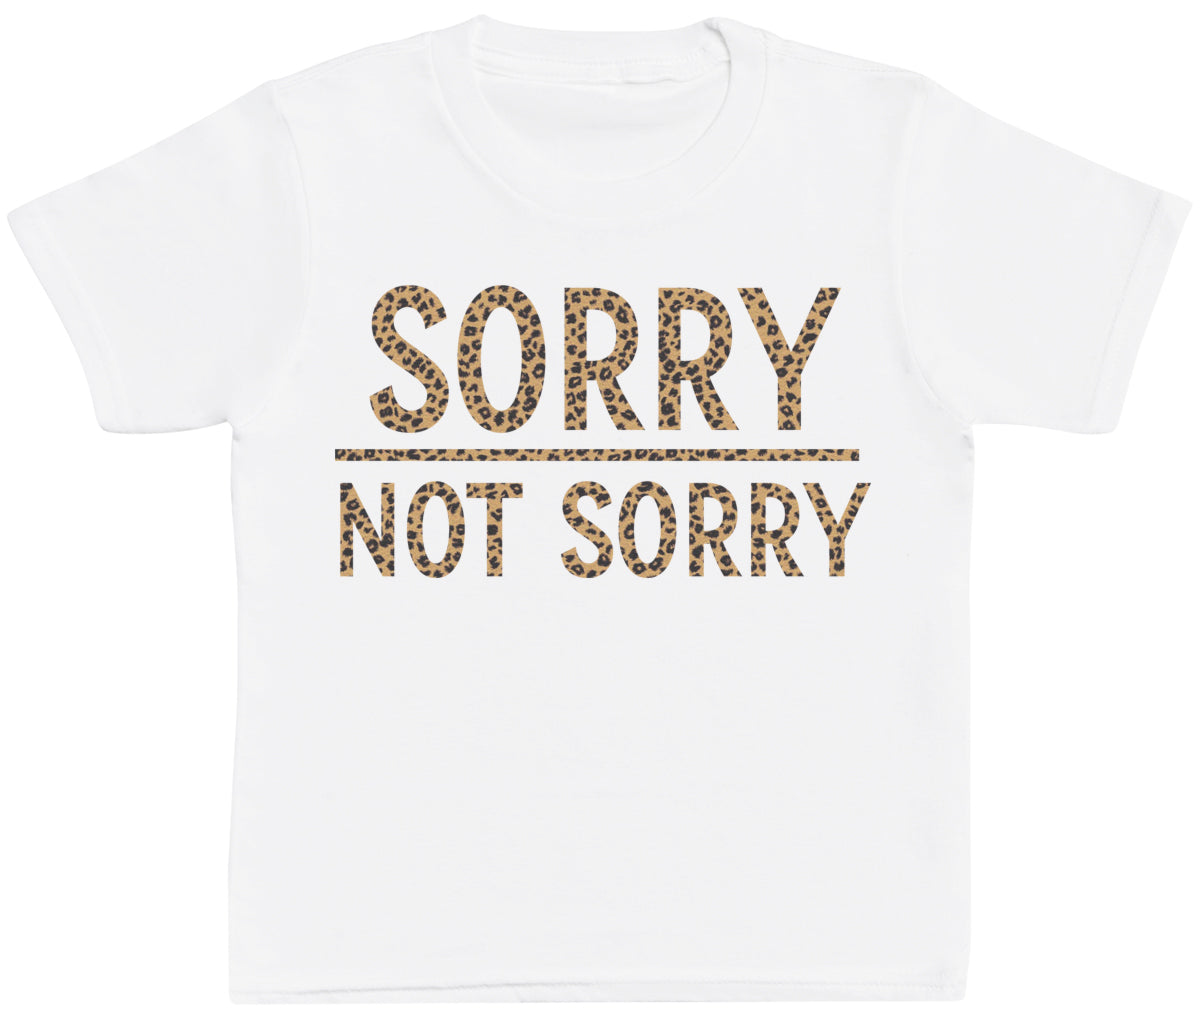 Sorry Not Sorry - T-Shirt